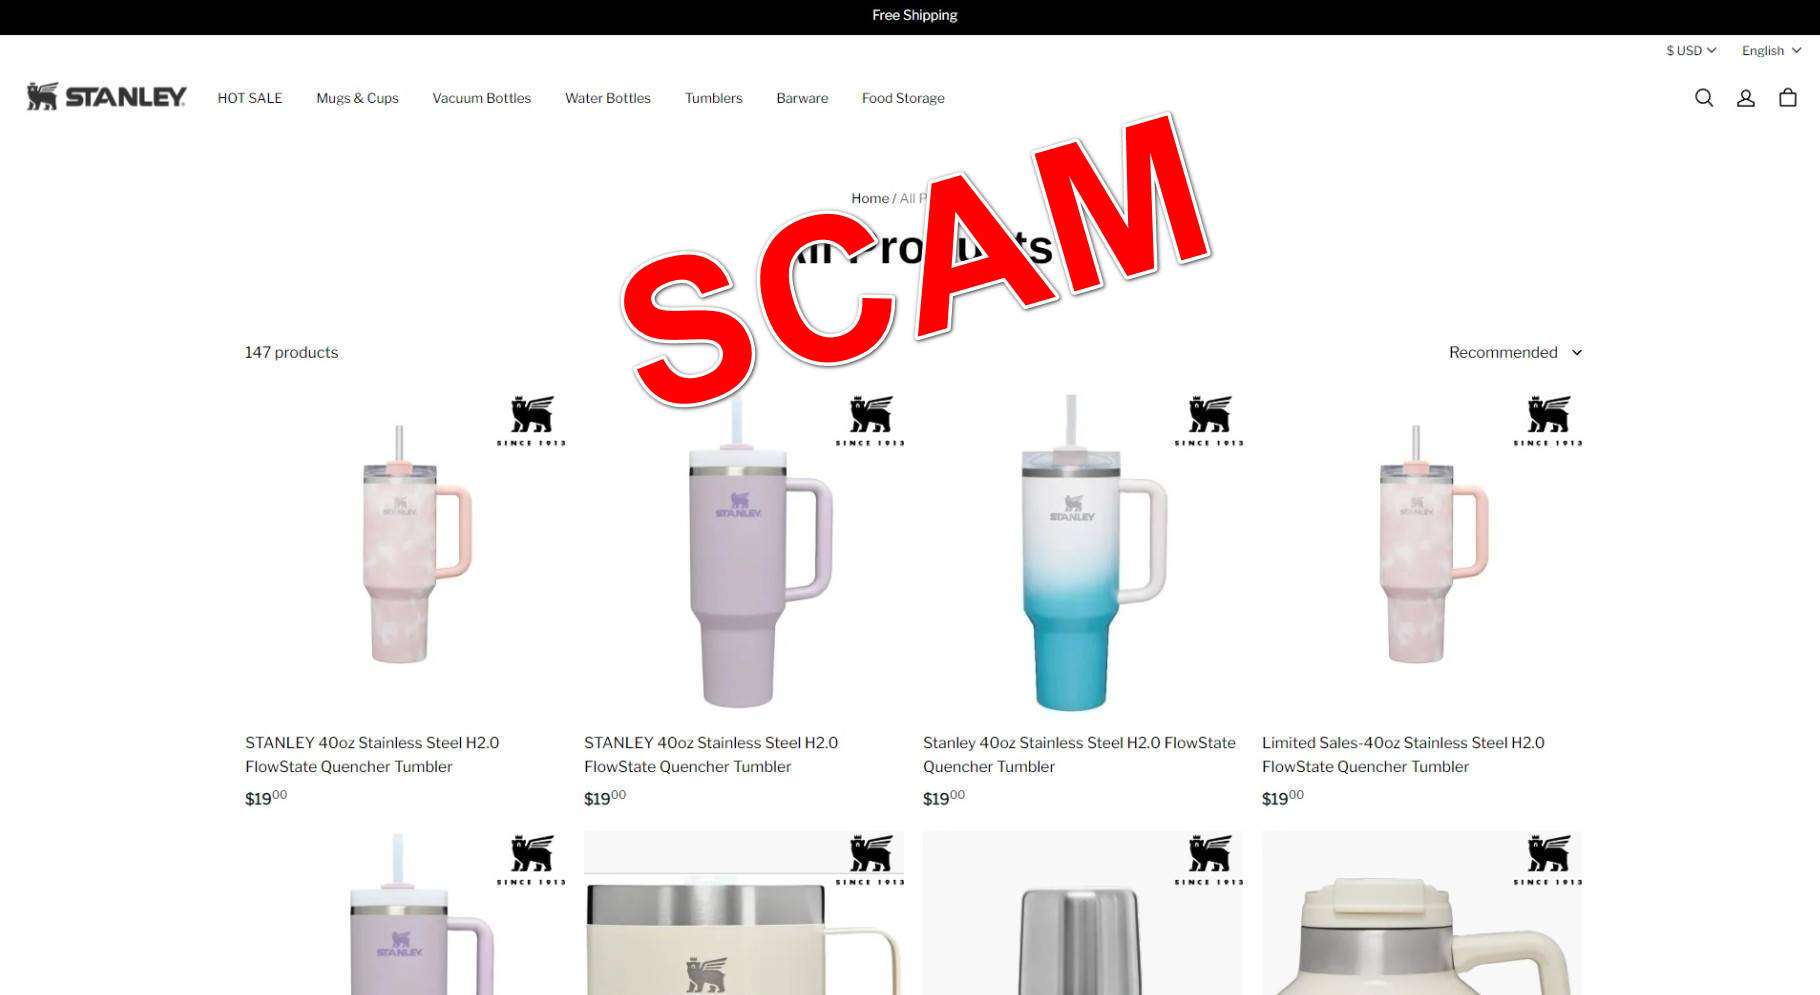 Fake 'Stanley Cup' Ads On Facebook - What You Need To Know